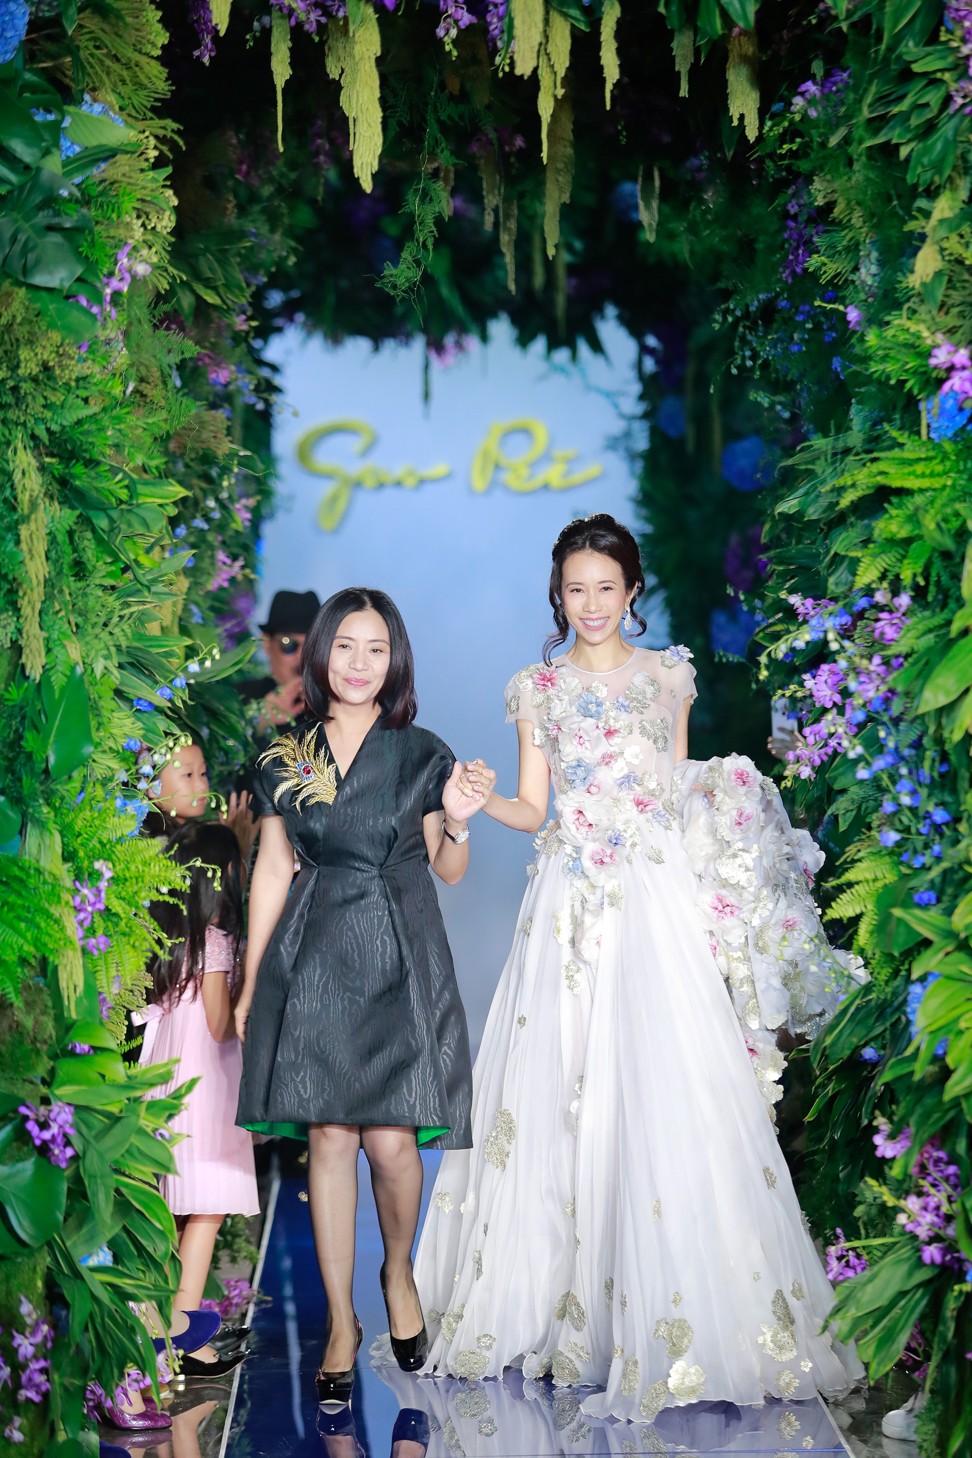 Karen Mok wearing a magnificent gown designed by Guo Pei.